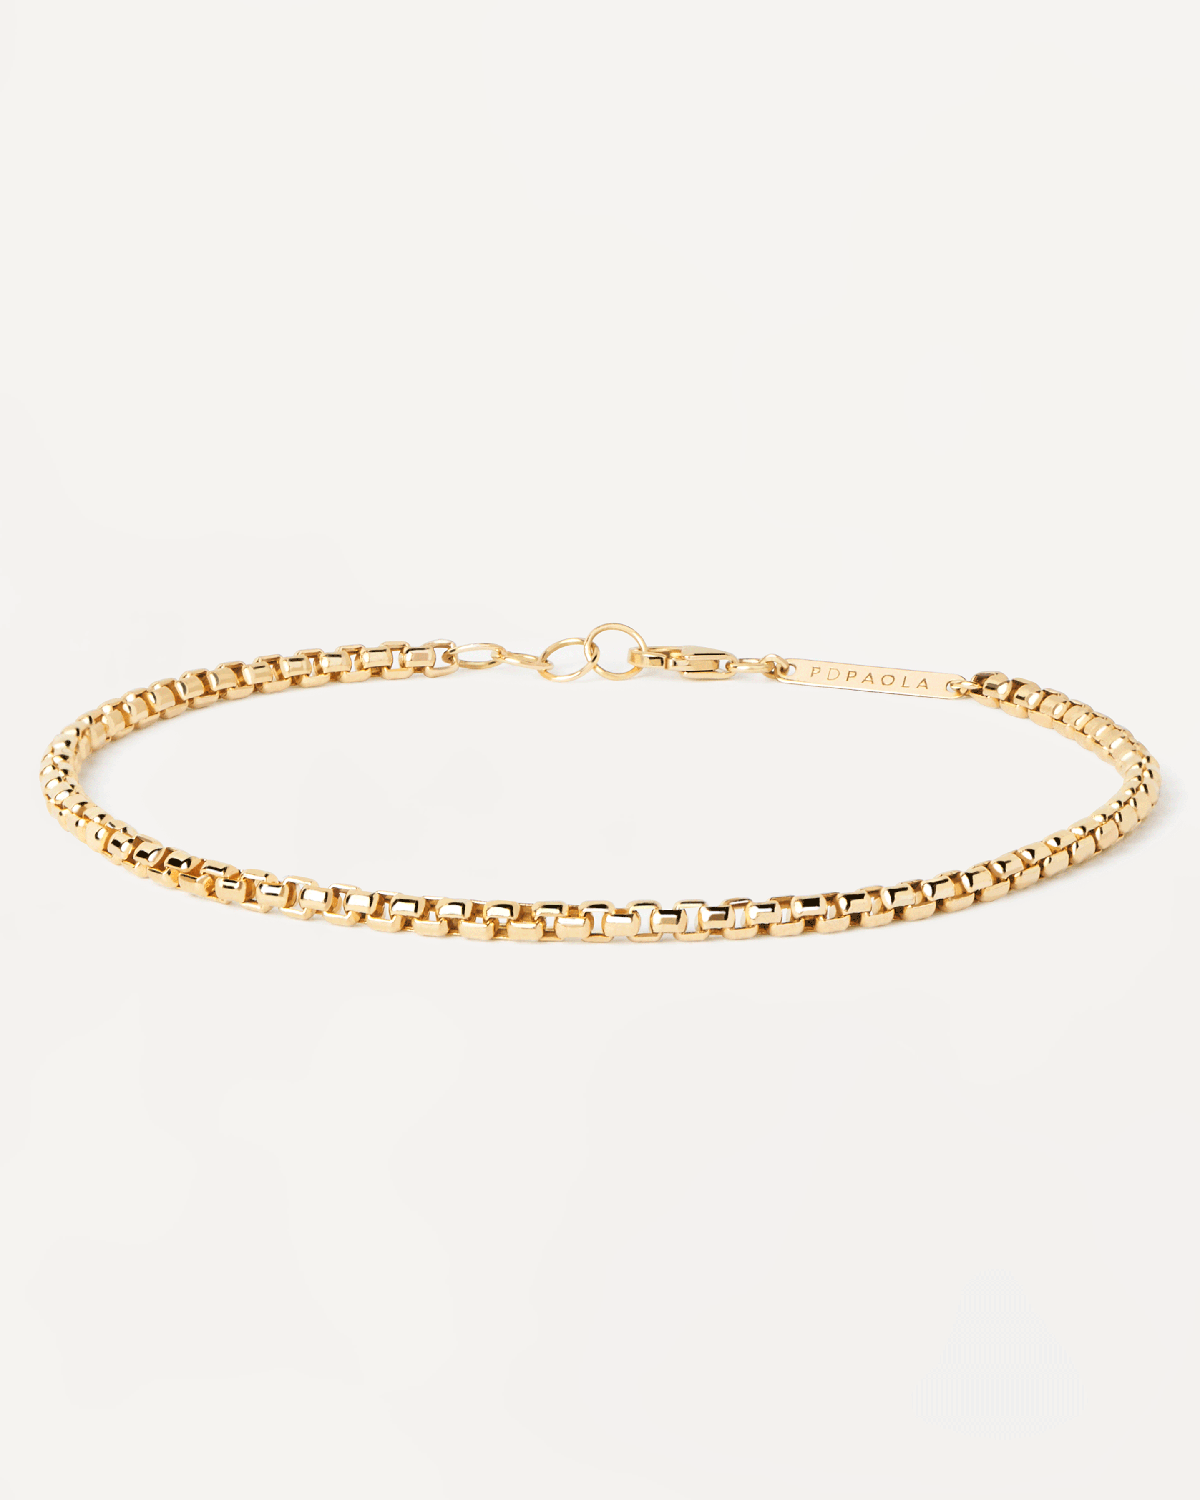 2023 Selection | Gold Box Chain Bracelet. 18K solid yellow gold chain bracelet with box links. Get the latest arrival from PDPAOLA. Place your order safely and get this Best Seller. Free Shipping.